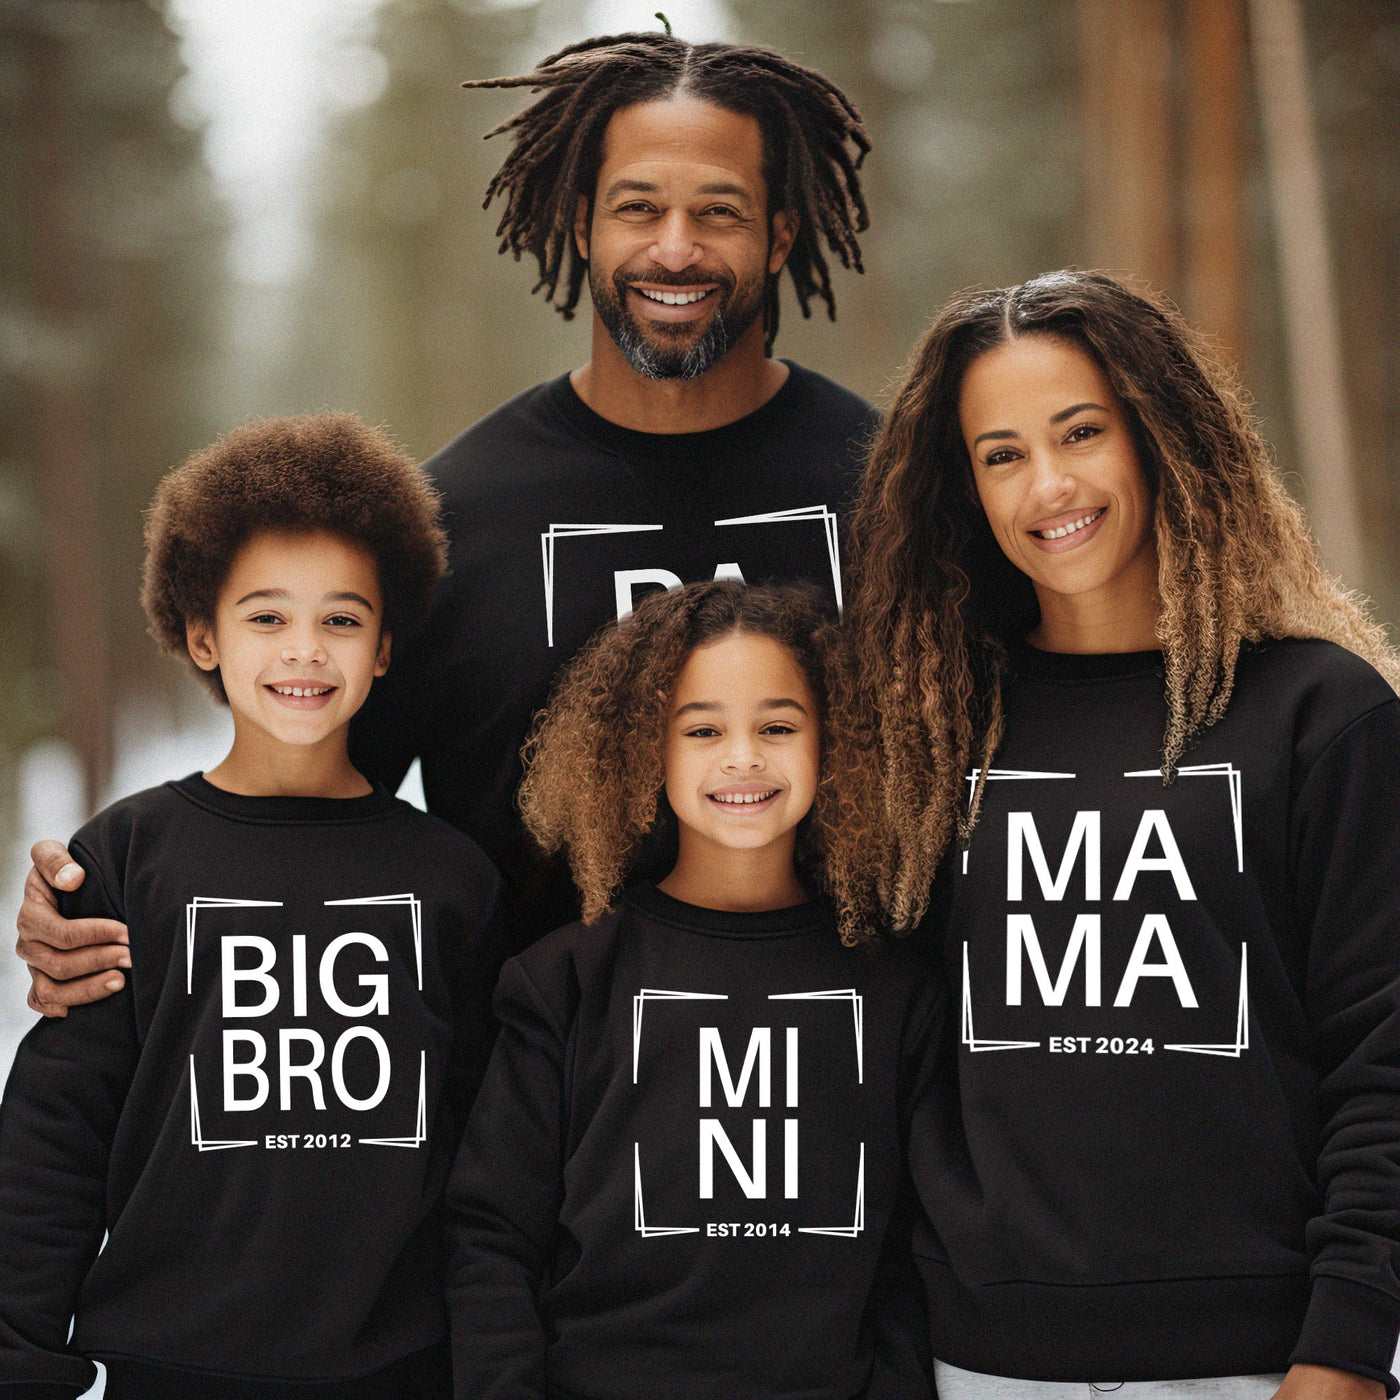 Mama Papa Mini Familienoutfit Geschenk Familie Mama Pullover Papa Vater Sohn Partnerlook Mama Tochter Outfit Big Bro Lil Sis Sweater Partner